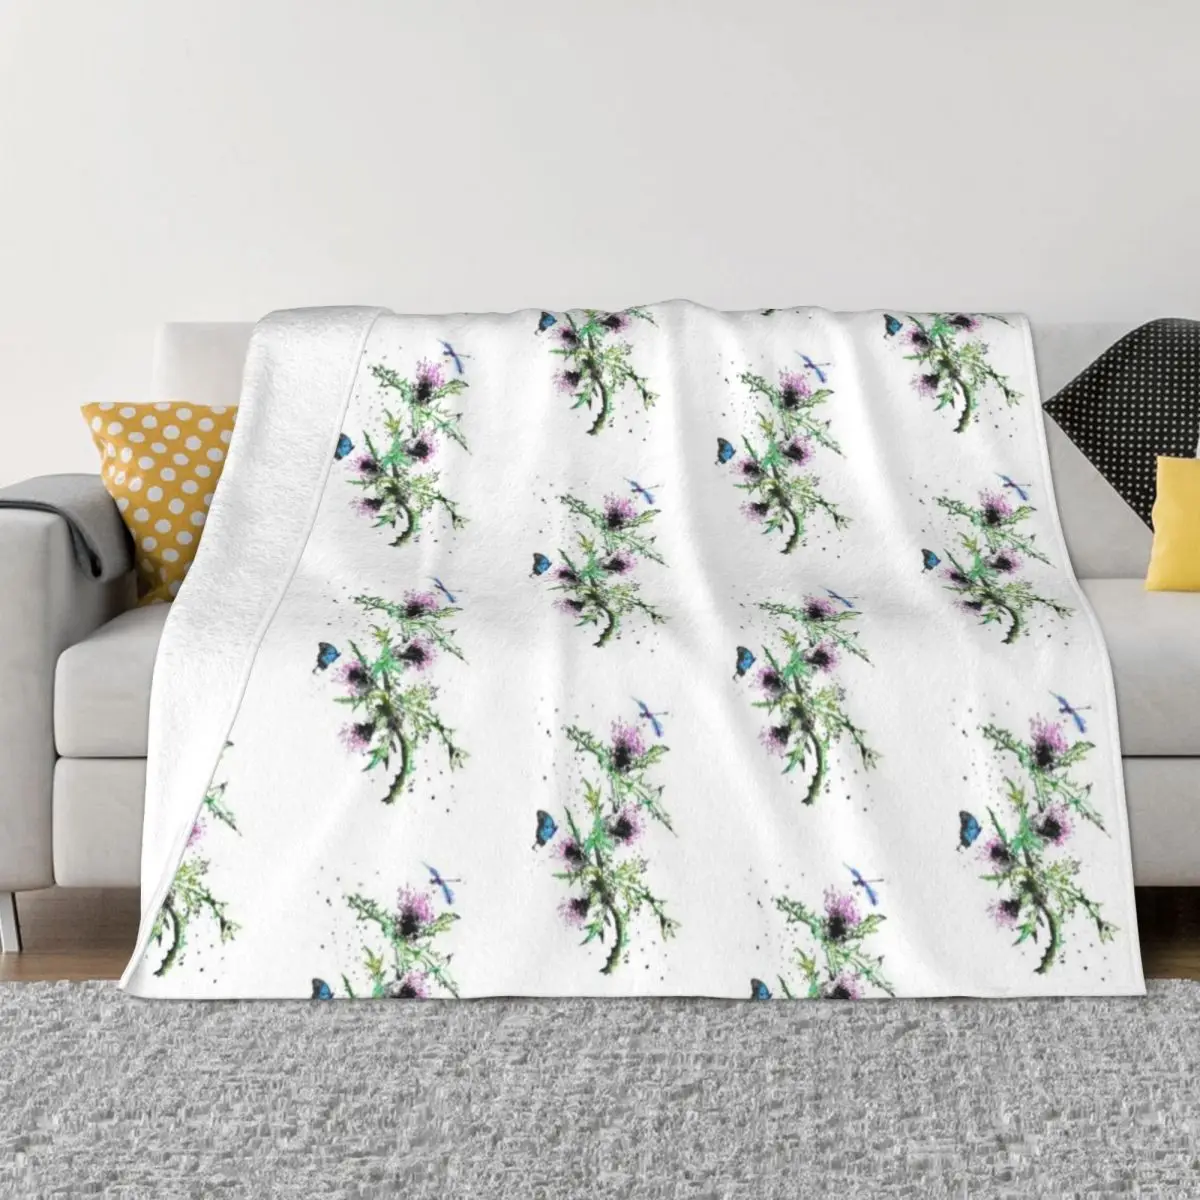 

Scottish Thistle, watercolor Scottish Thistle Throw Blanket Tourist Baby Decorative Beds Nap Blankets